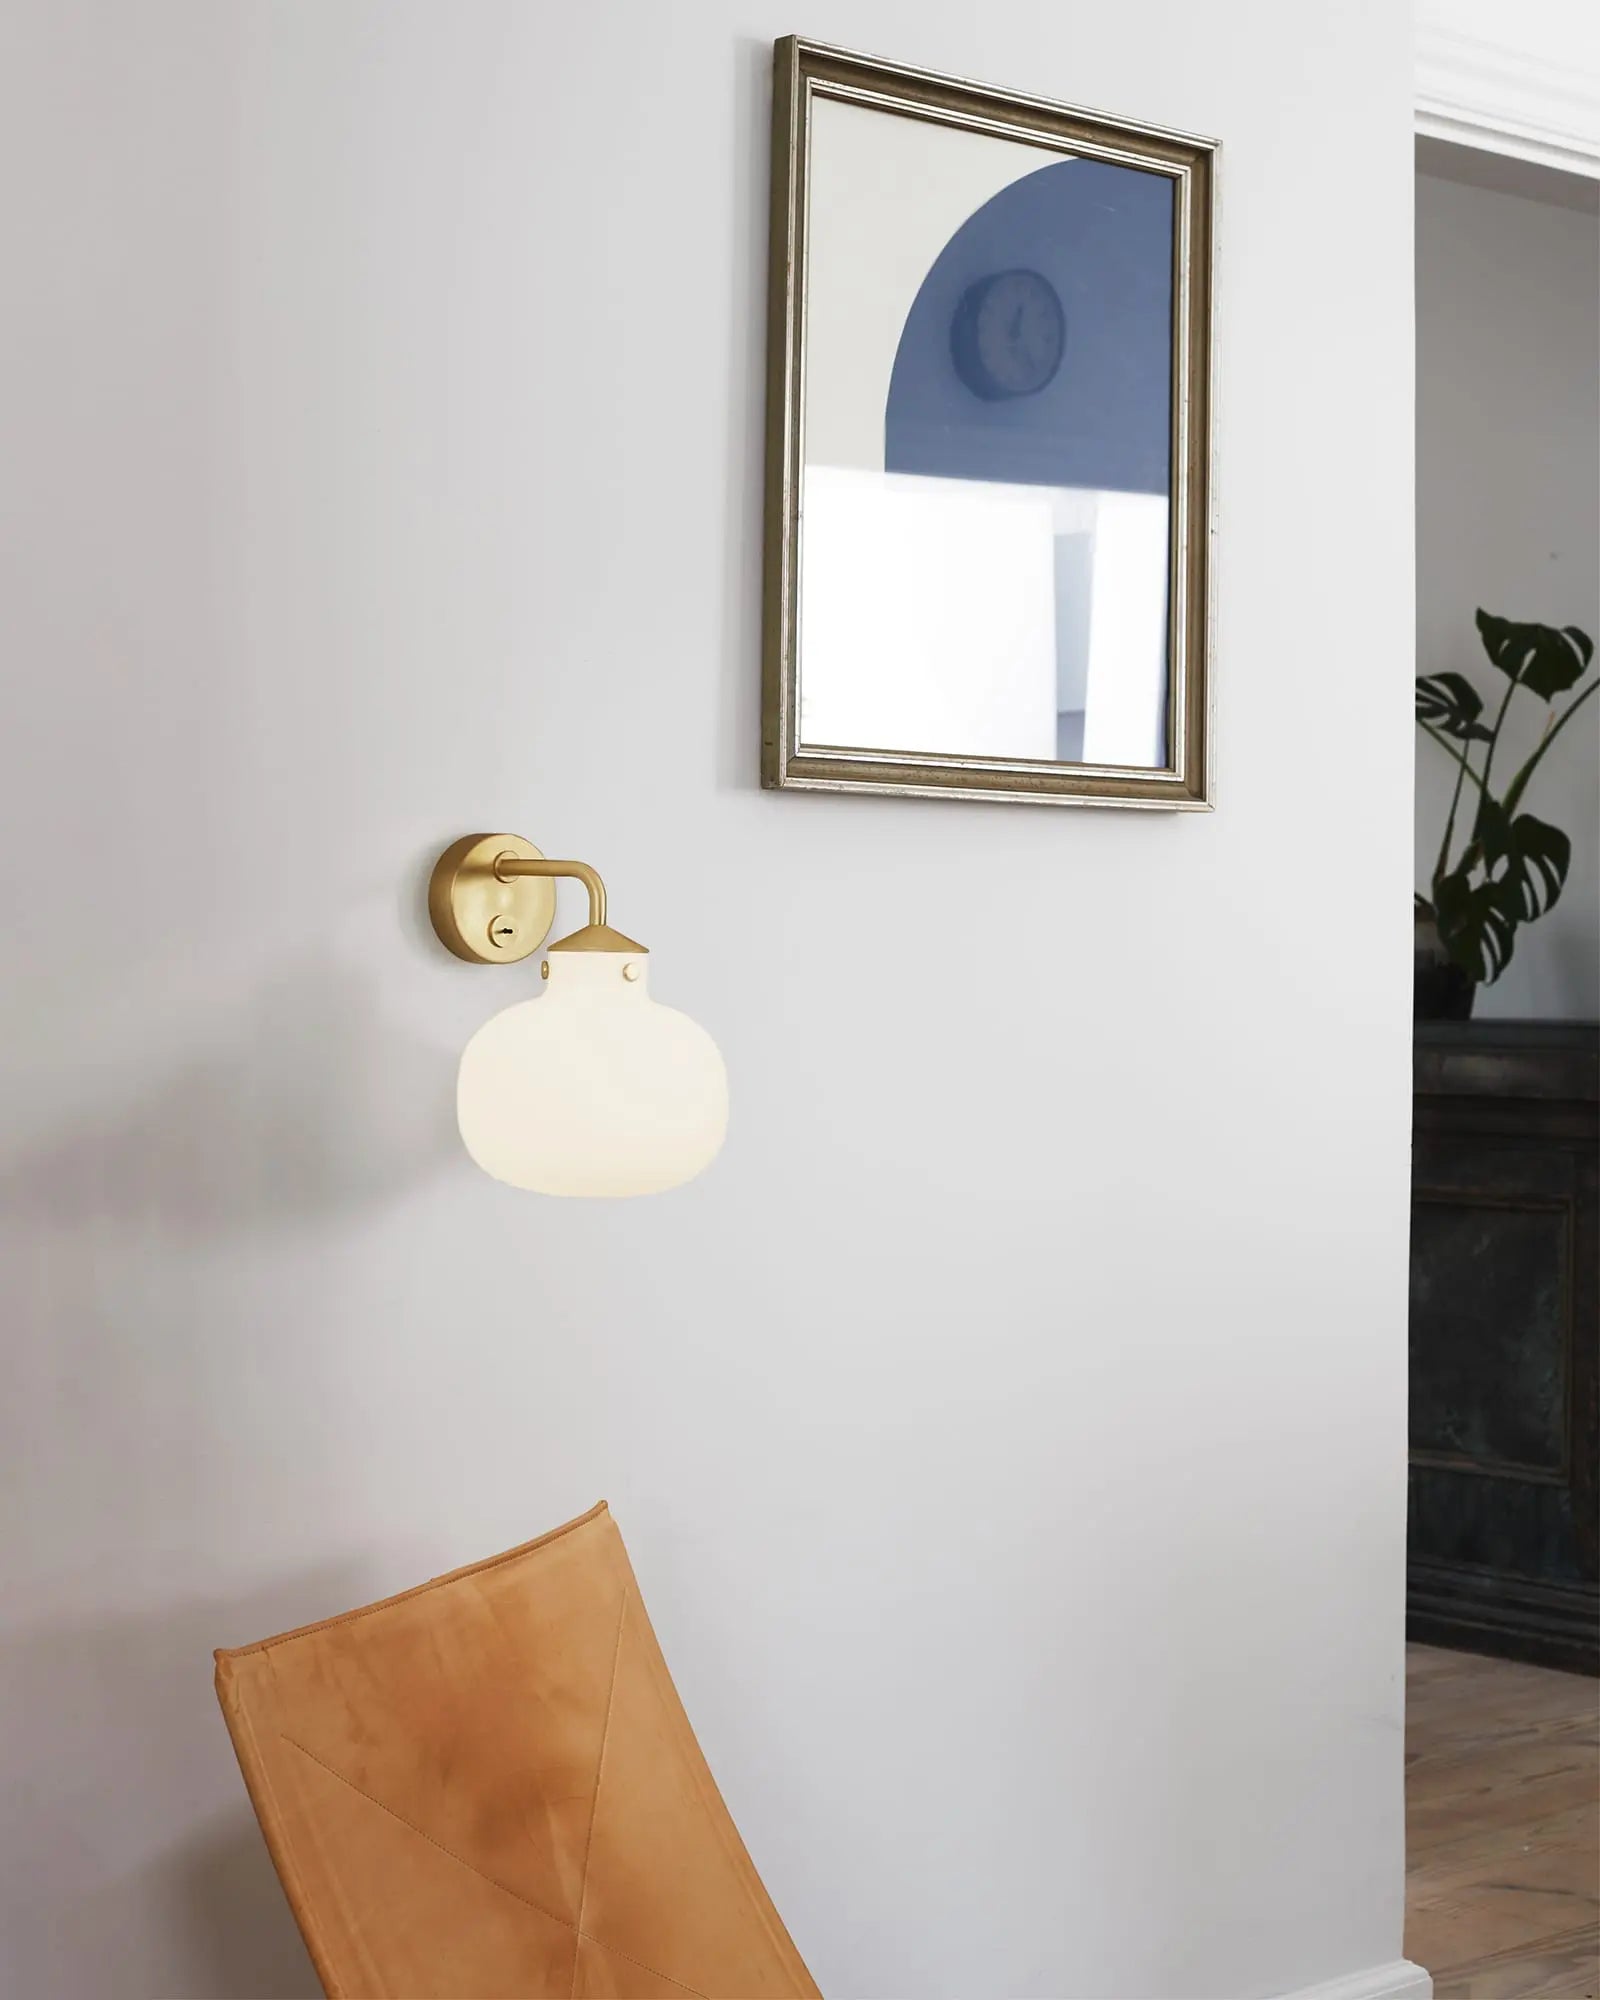 Raito wall light in a hallway above a seat